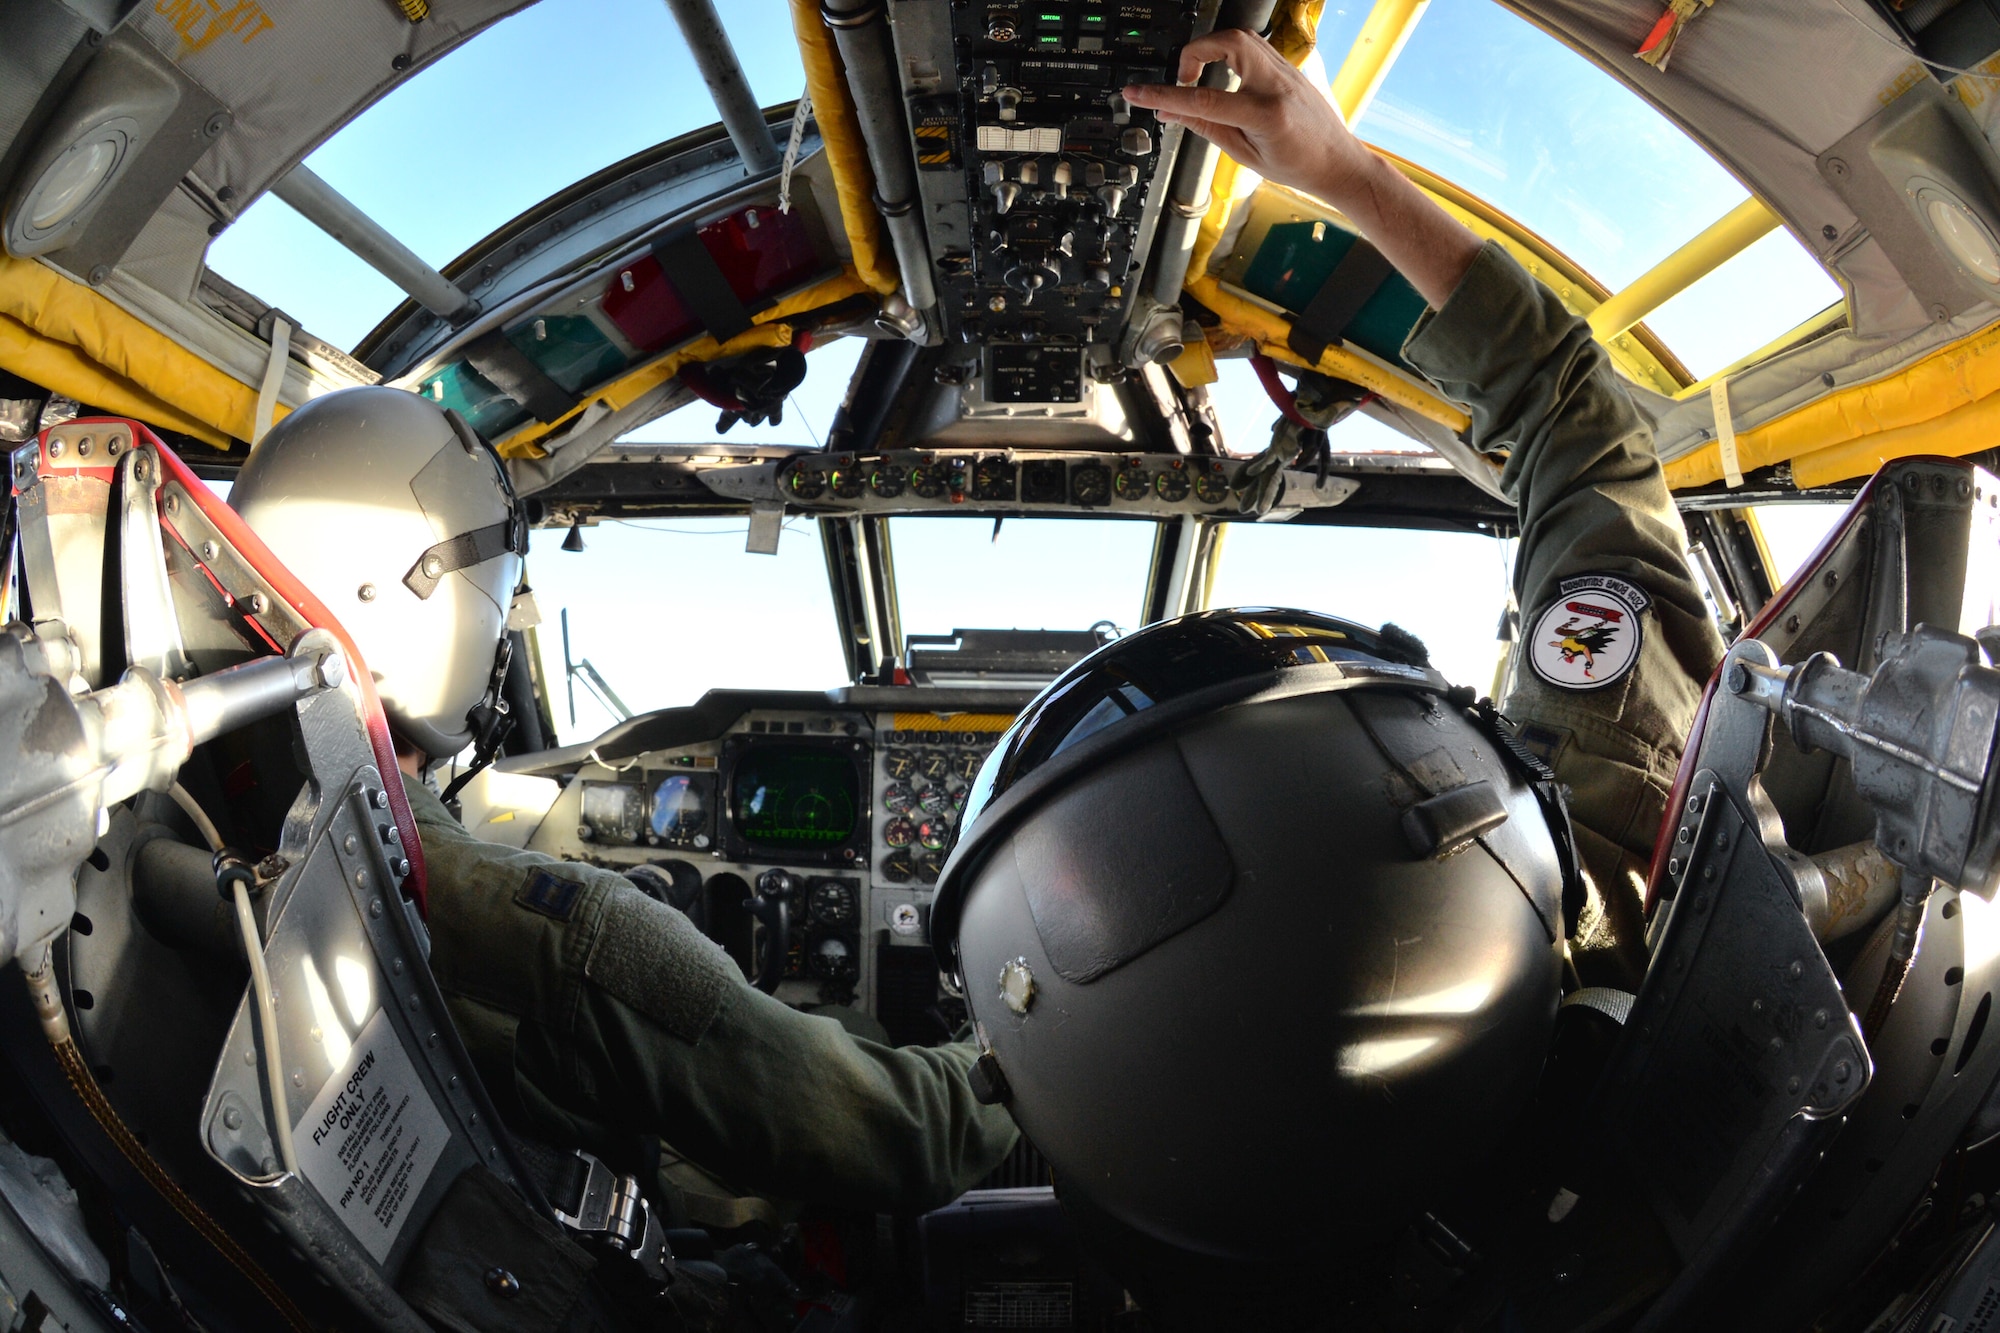 Capt.  Brian D’Arcy, B-52 Stratofortress copilot with the 2nd Bomb Wing’s 20th Bomb Squadron, adjusts radio frequencies during a flight to the Trøndelag region of Norway as part of NATO exercise Cold Response 16, March 1, 2016. This year’s iteration of the biennial military training exercise included air assets such as the B-52, F-16 Fighting Falcon, P-3 Orion and KC-135 Stratotanker, among others.  (U.S. Air Force photo/Senior Airman Joseph Raatz)